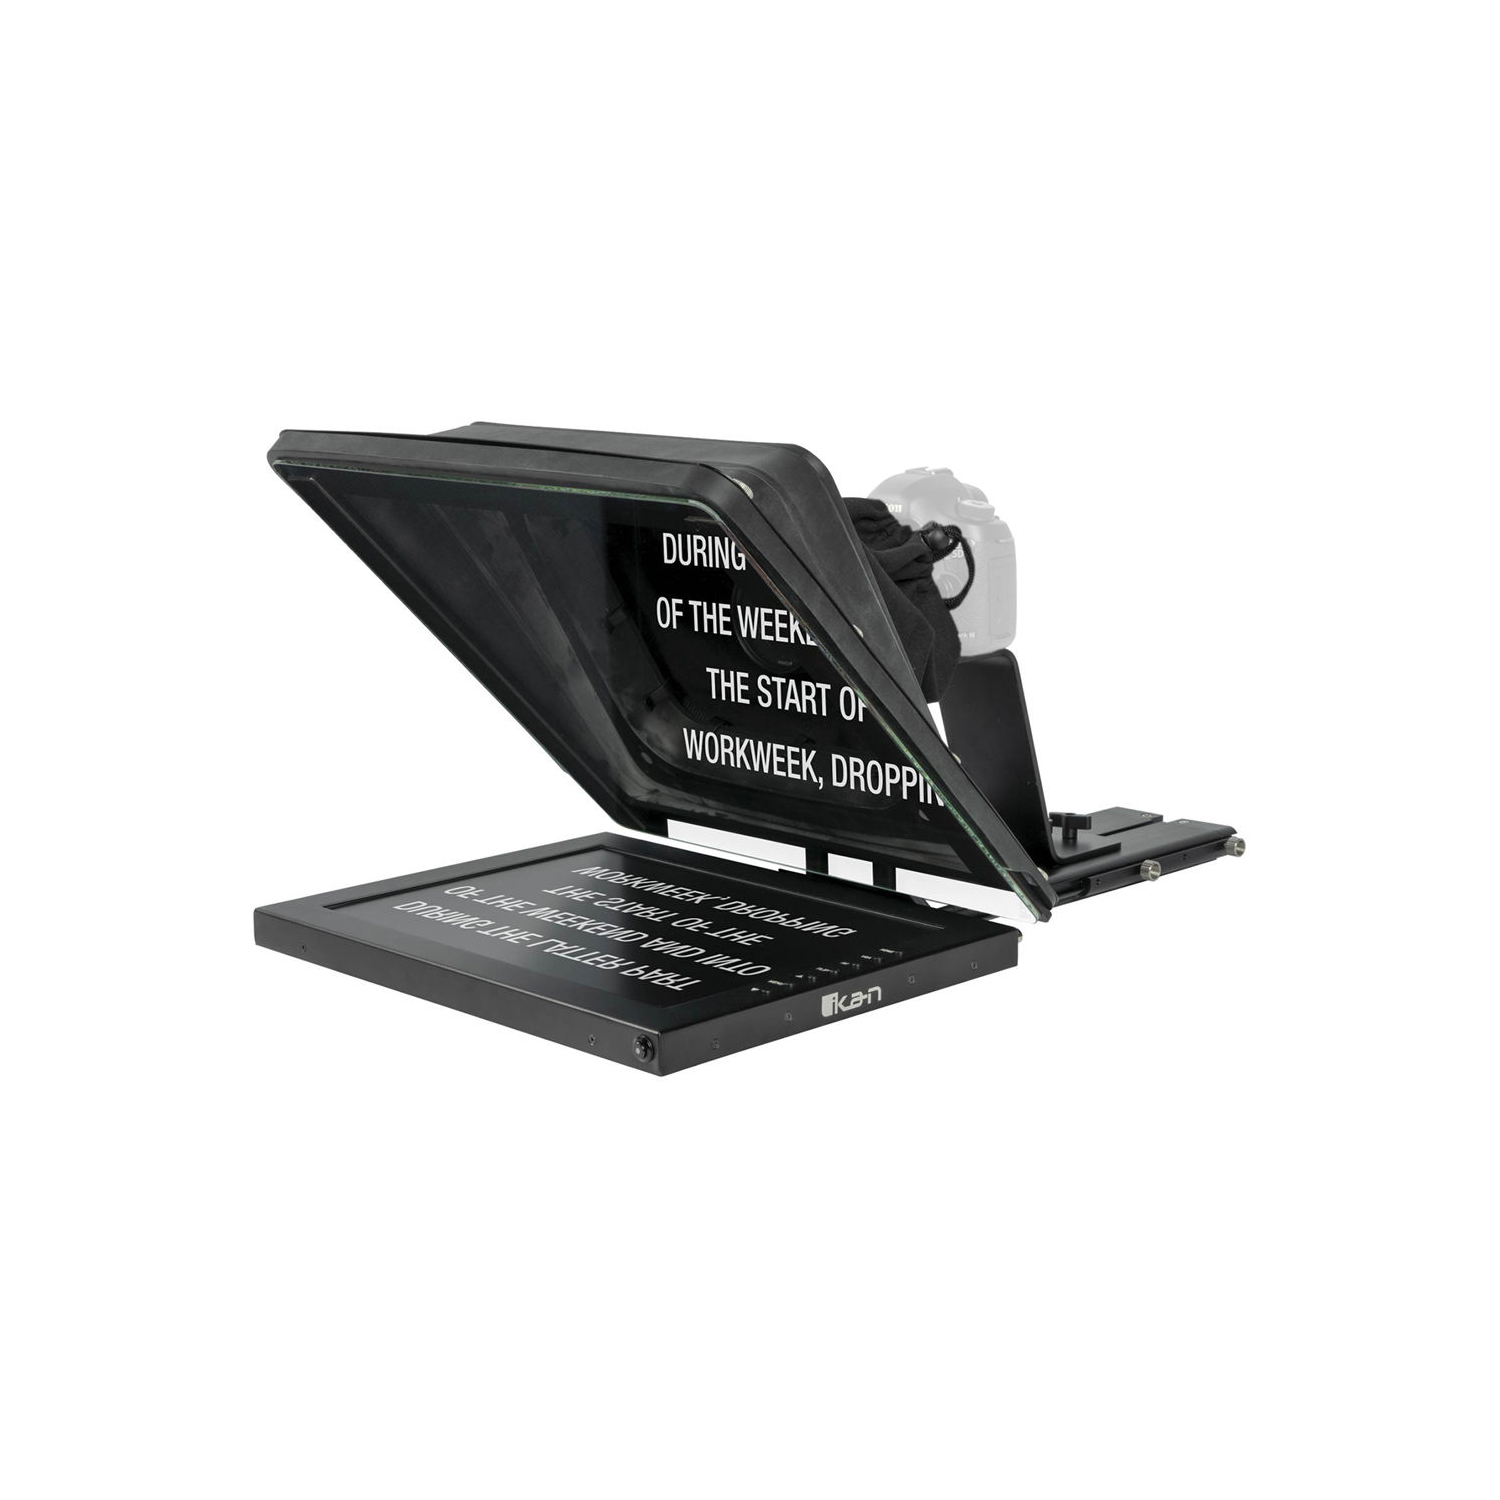 ikan Professional High Bright Teleprompter (17")